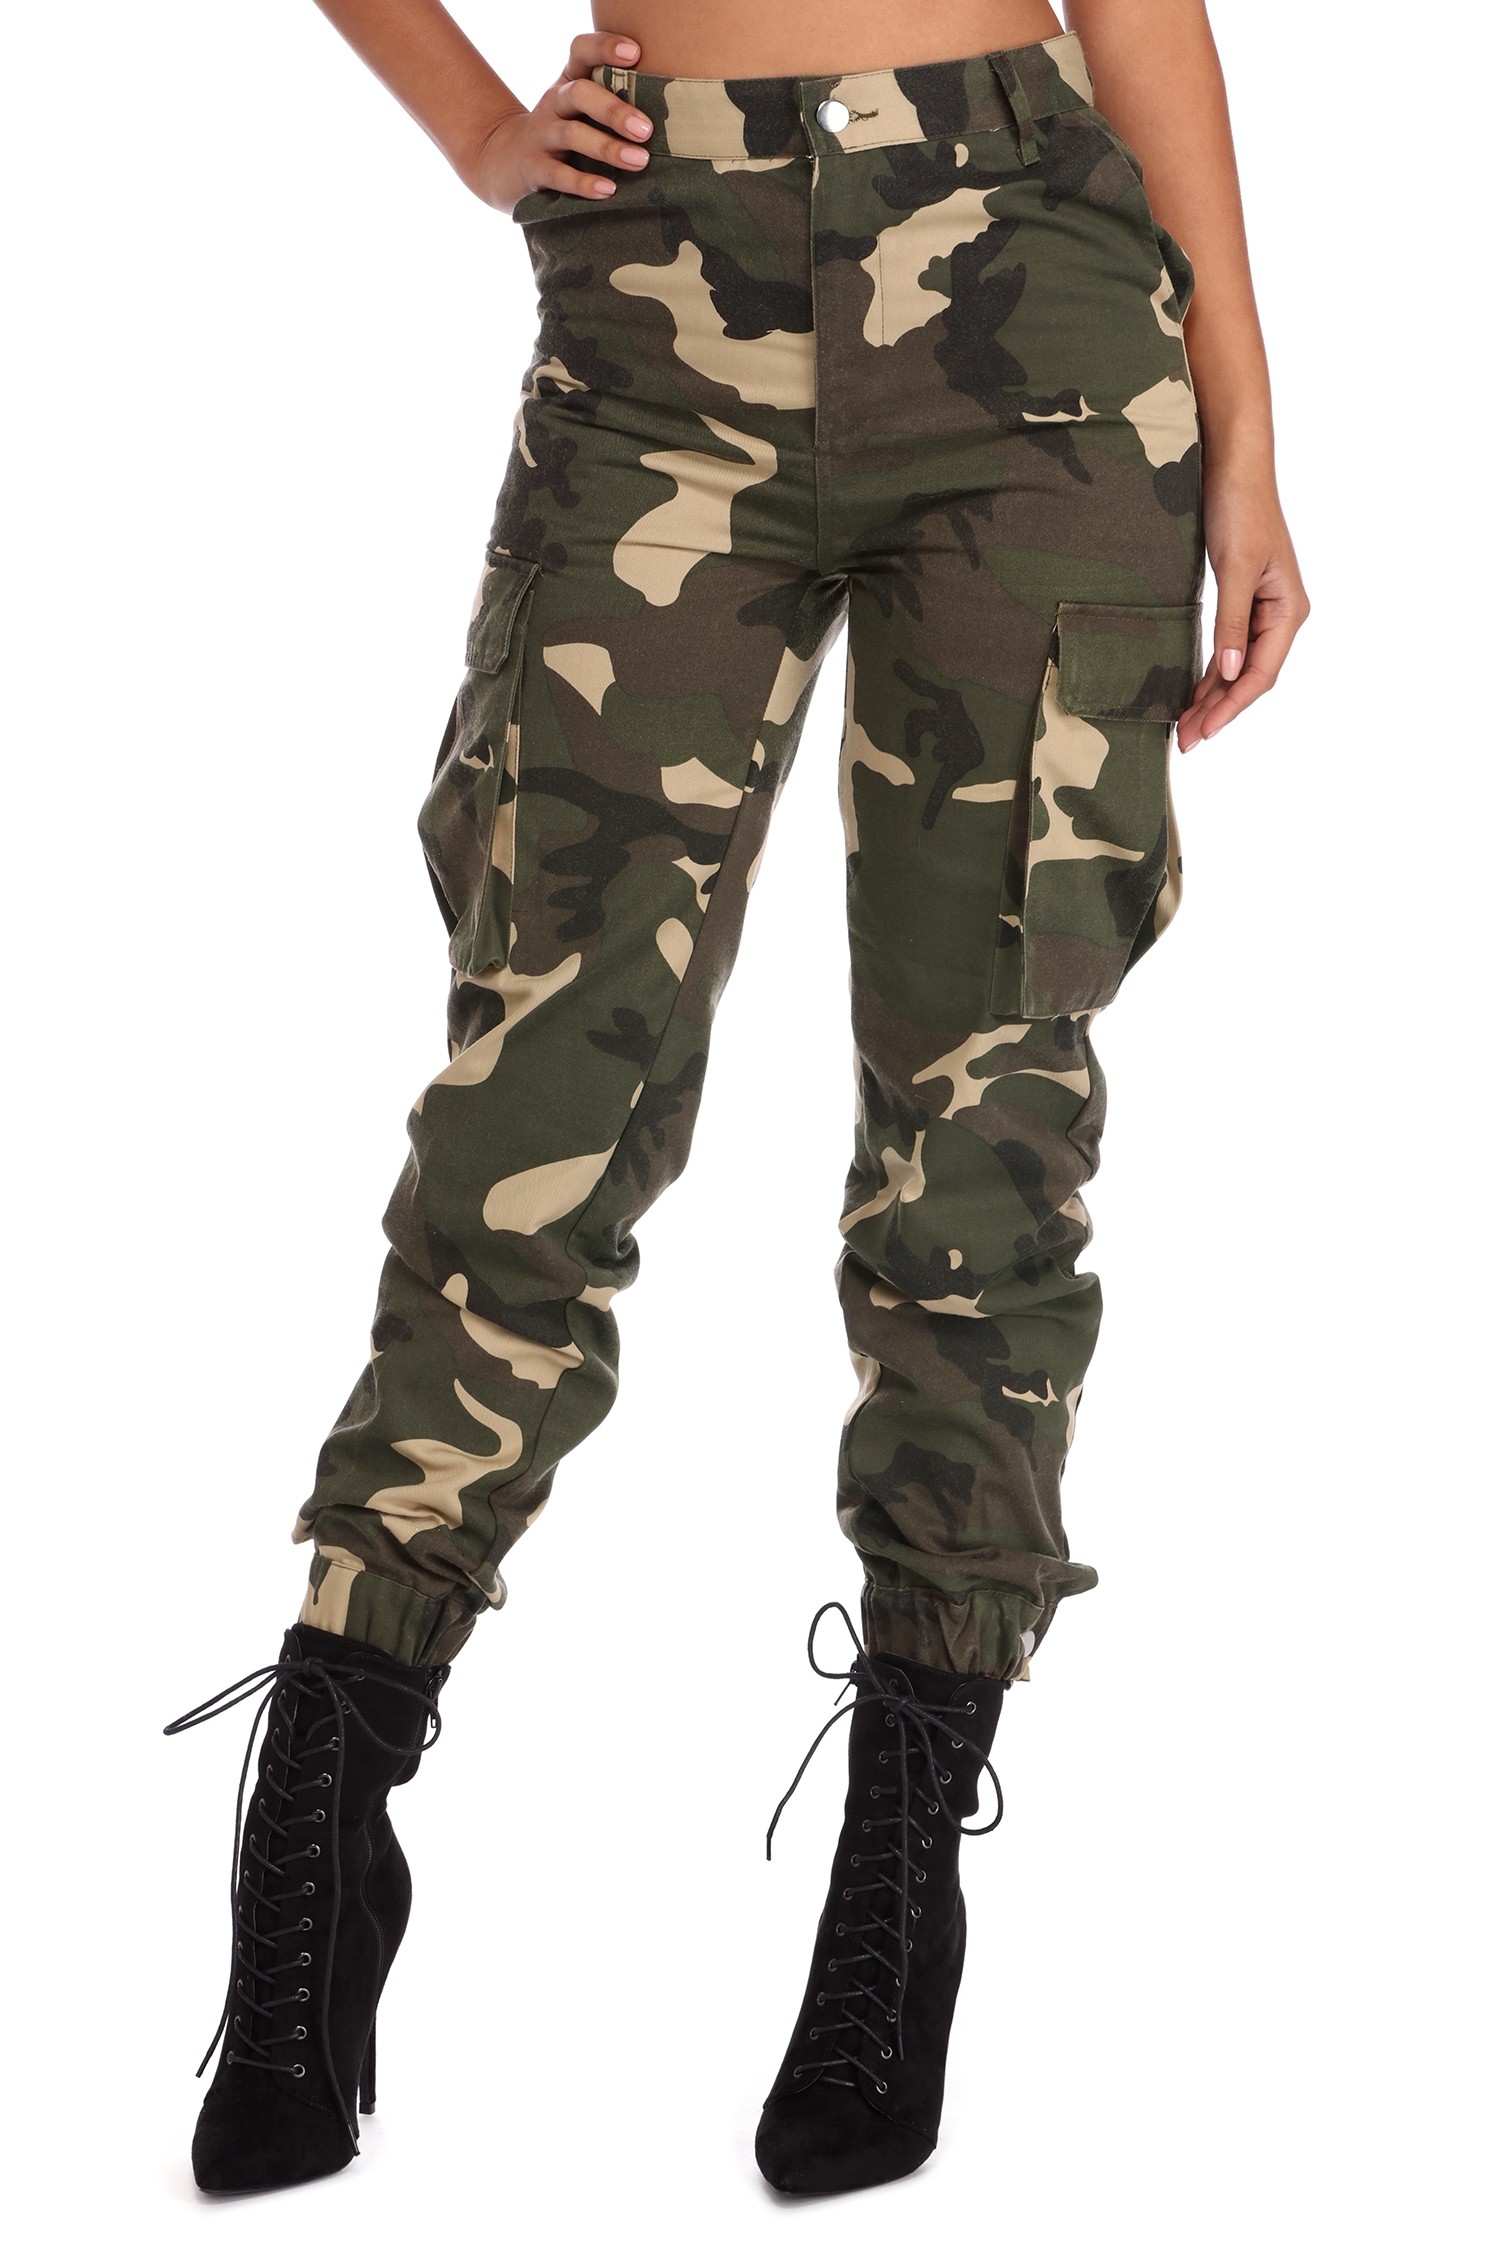 Camouflage Pants – Combine pants with camouflage pattern correctly